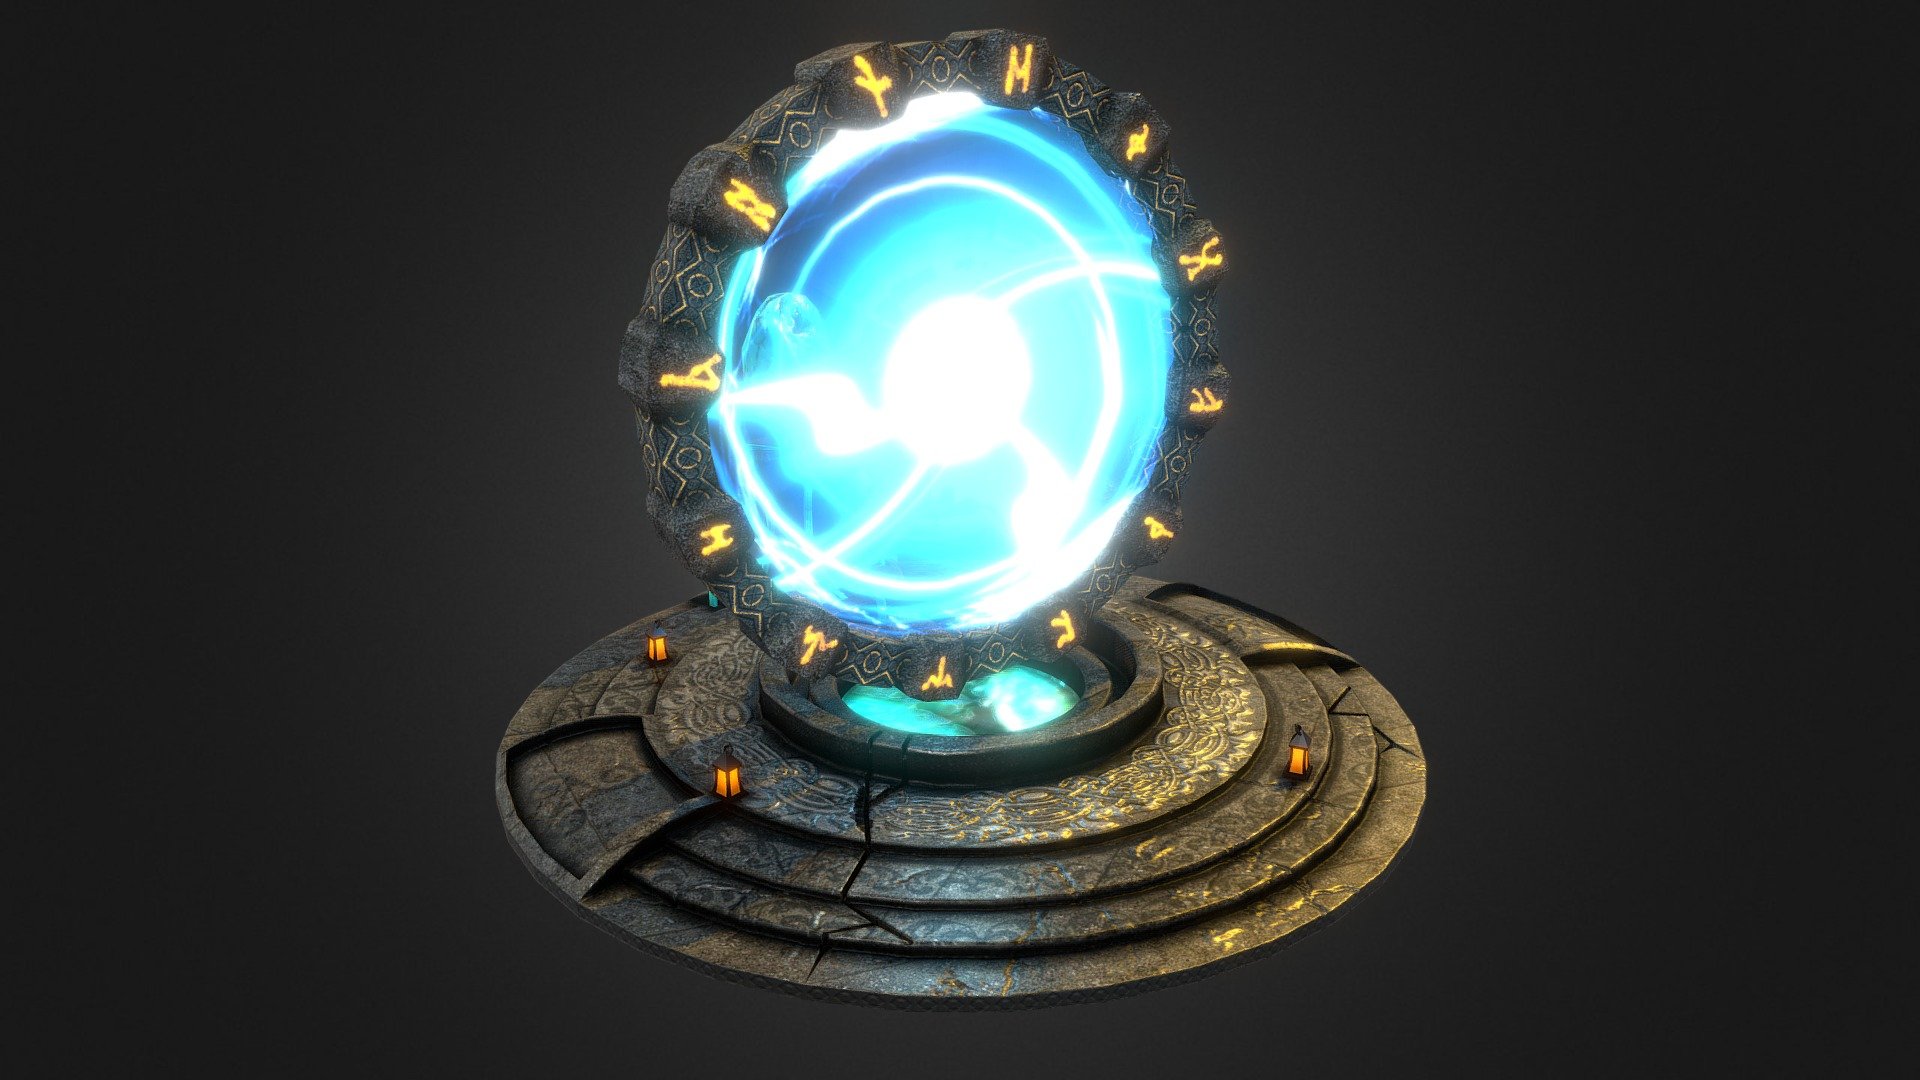 World Of Warcraft inspired portal (Model Low Poly)
Textures Diffuse
Textures Normal
Textures self-illuminated 
Textures Alpha

Create by Aaron3D:
aarontresdesero@gmail.com - World Of Warcraft inspired portal - WOW - Buy Royalty Free 3D model by Aaron3D (@Aarontresde) 3d model